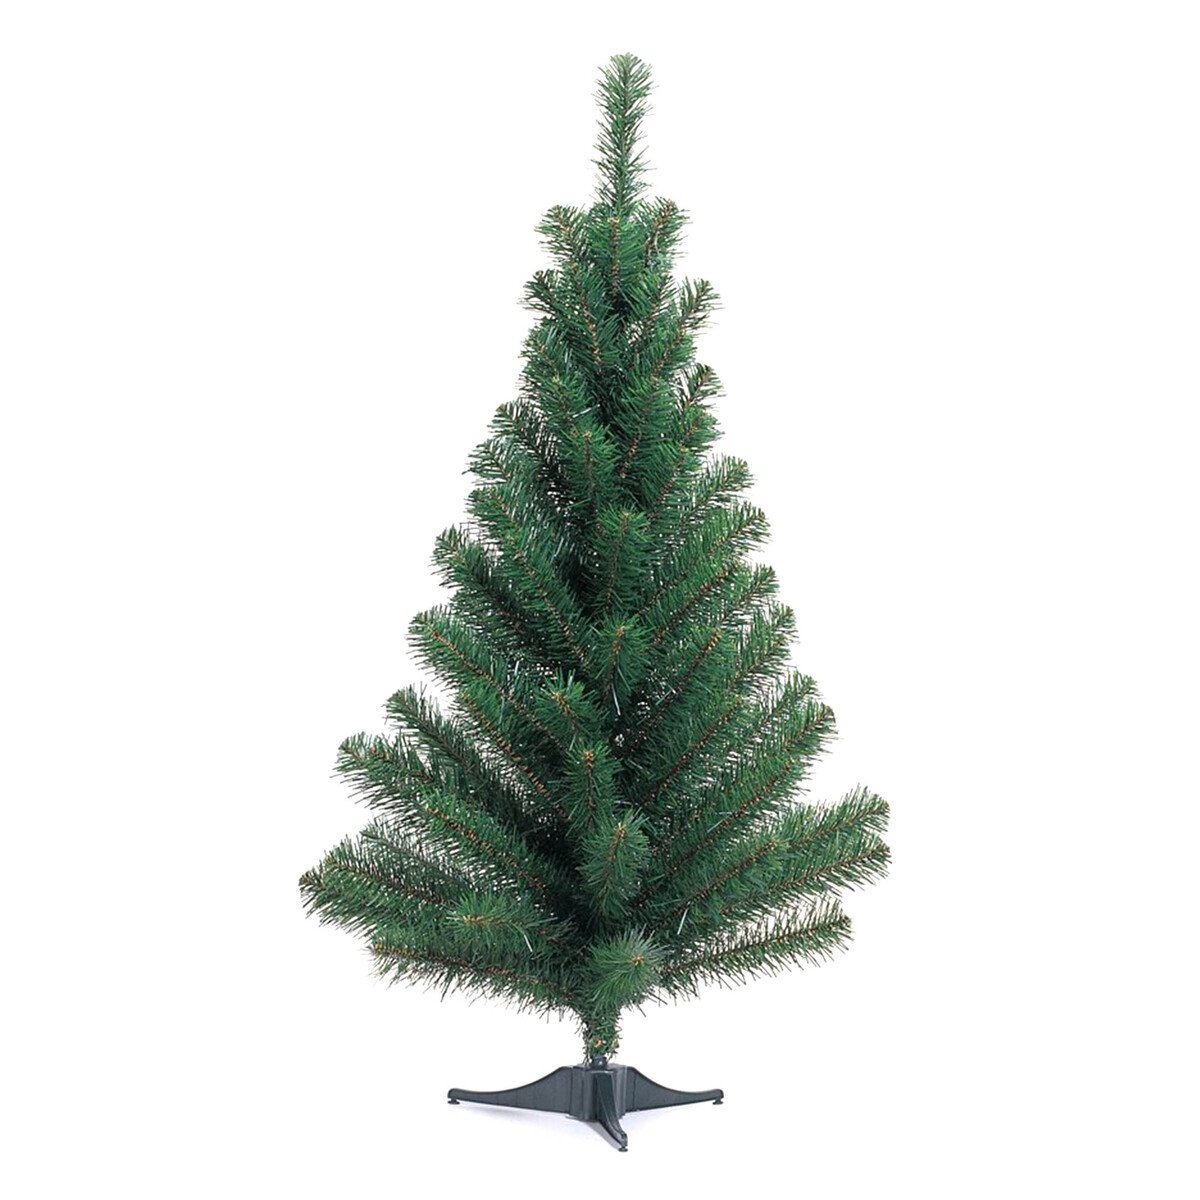 Party Fusion Home Decoration Tree Green SMOT01 3 ft